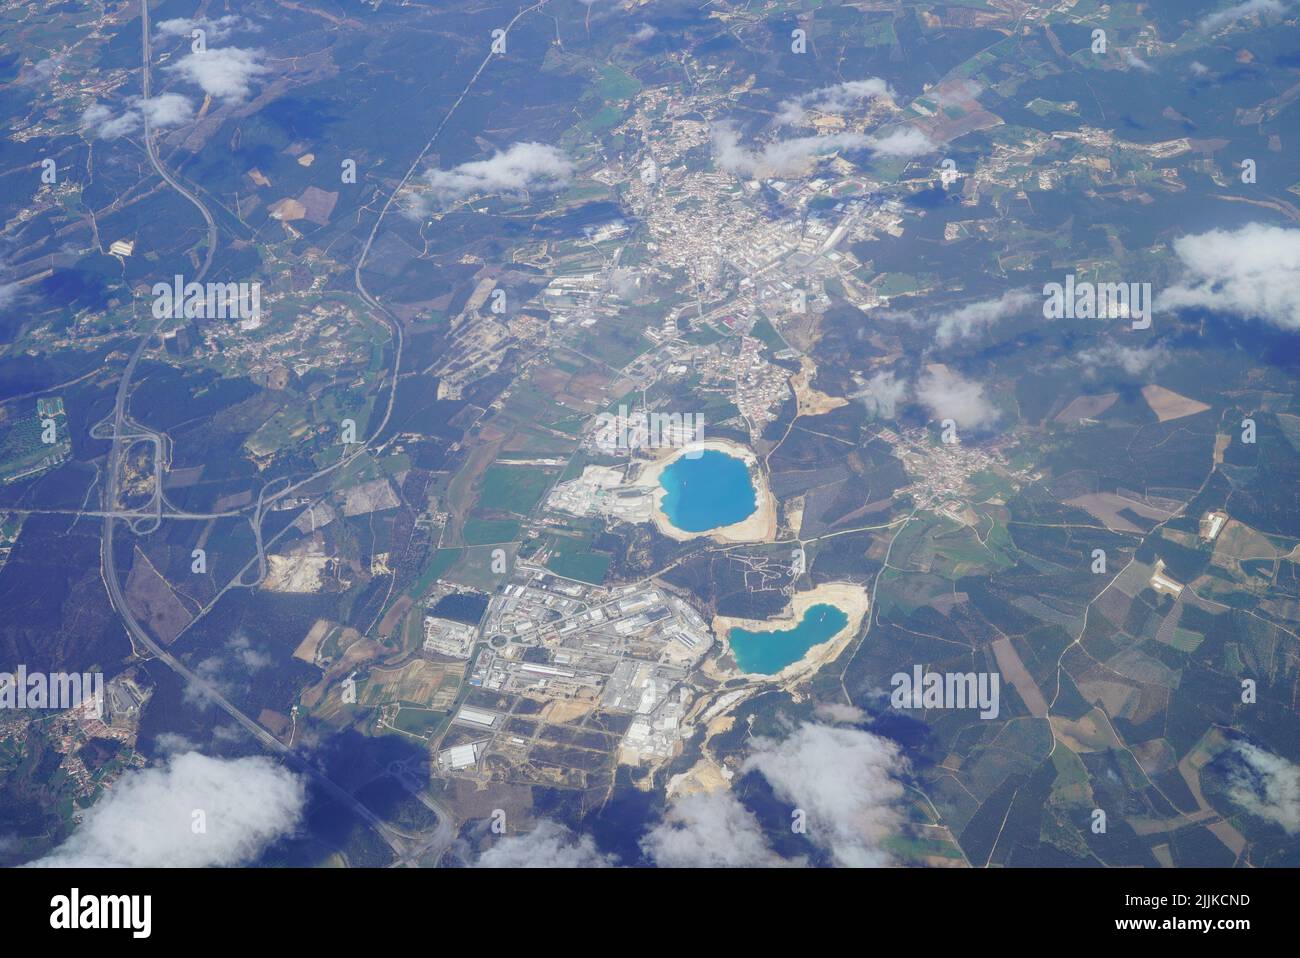 The view from the airplane - natural map designing Stock Photo